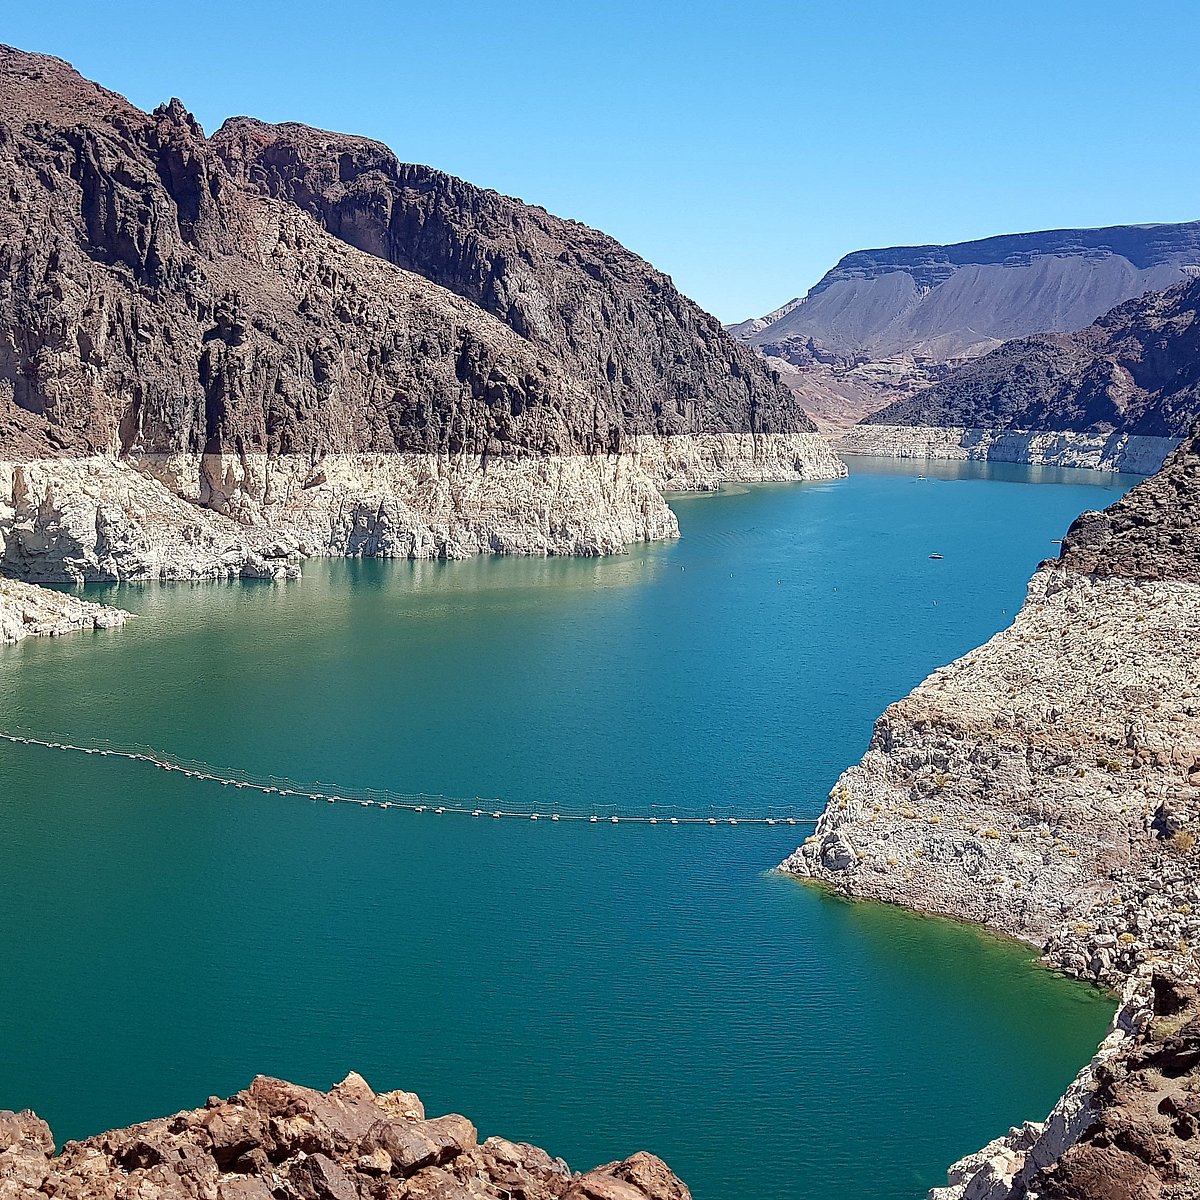 Las Vegas with Kids: 30 Things to Do for a Memorable Family Trip - Hoover Dam: A Marvel of Engineering